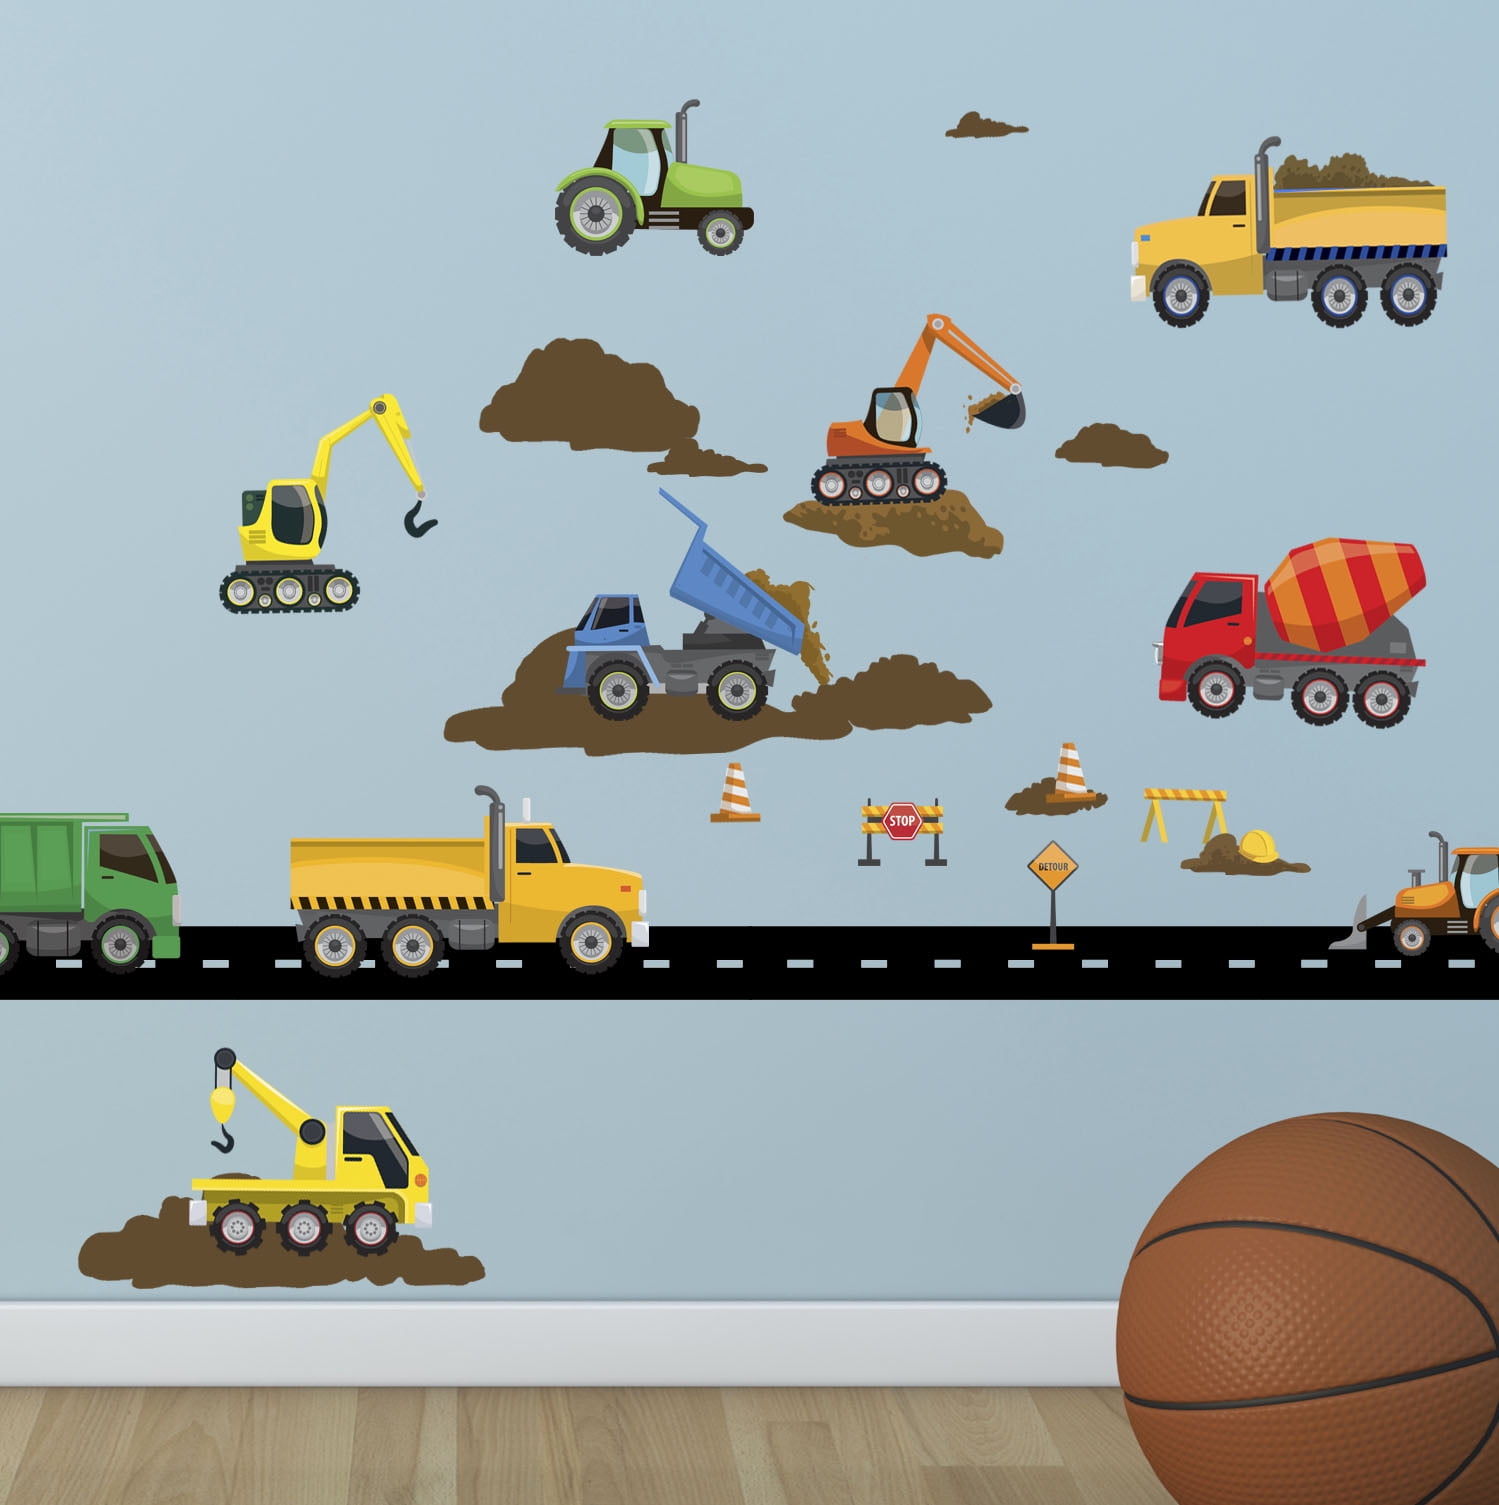 Work Trucks Building Construction Vehicles Digger Wall Art Decal Sticker Picture